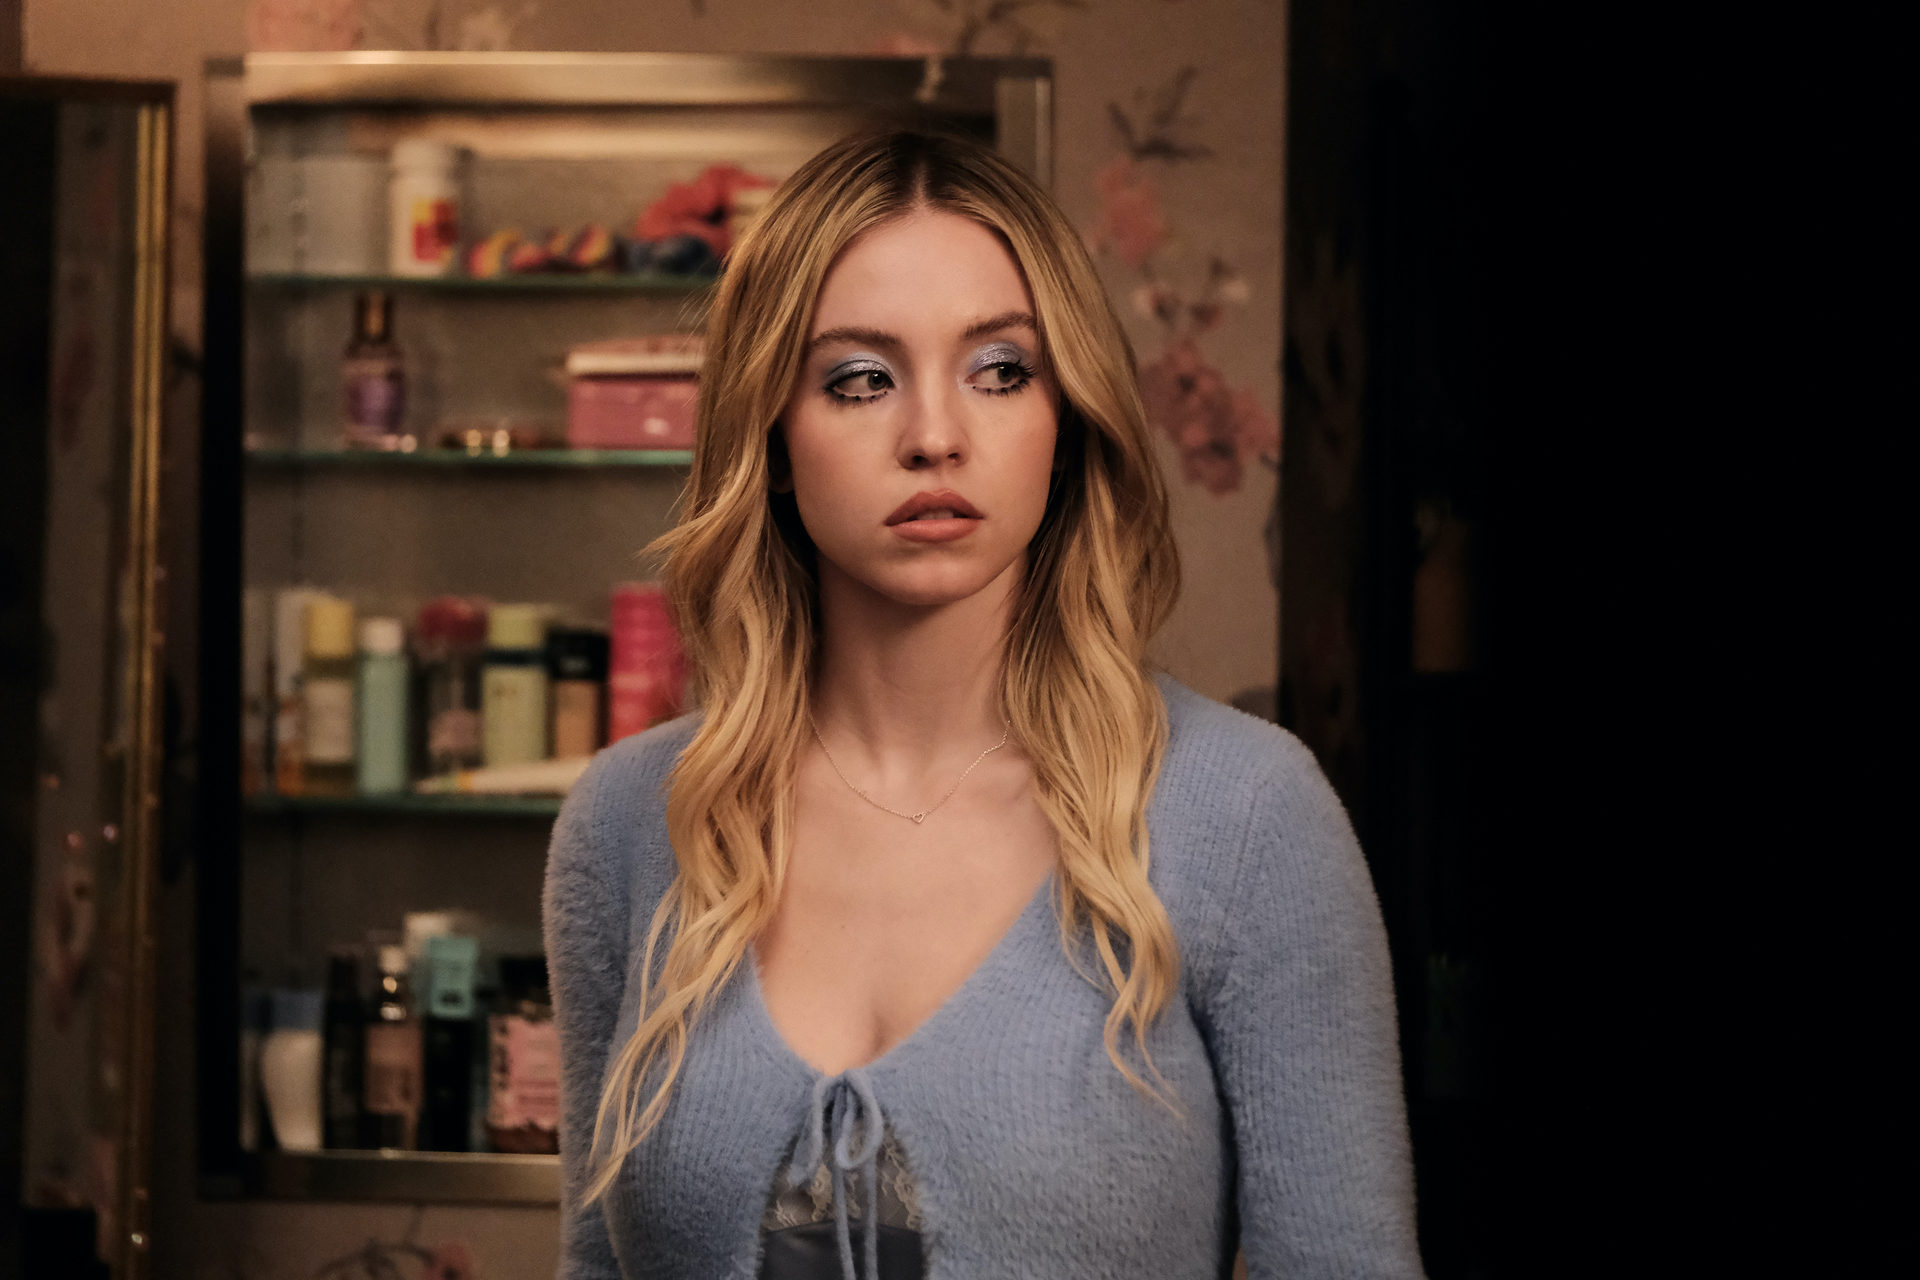 Will Gluck, the director behind films such as 'Easy A' and 'Friends with Benefits', has chosen his leads for his latest untitled rom-com: Glen Powell and Sydney Sweeney.